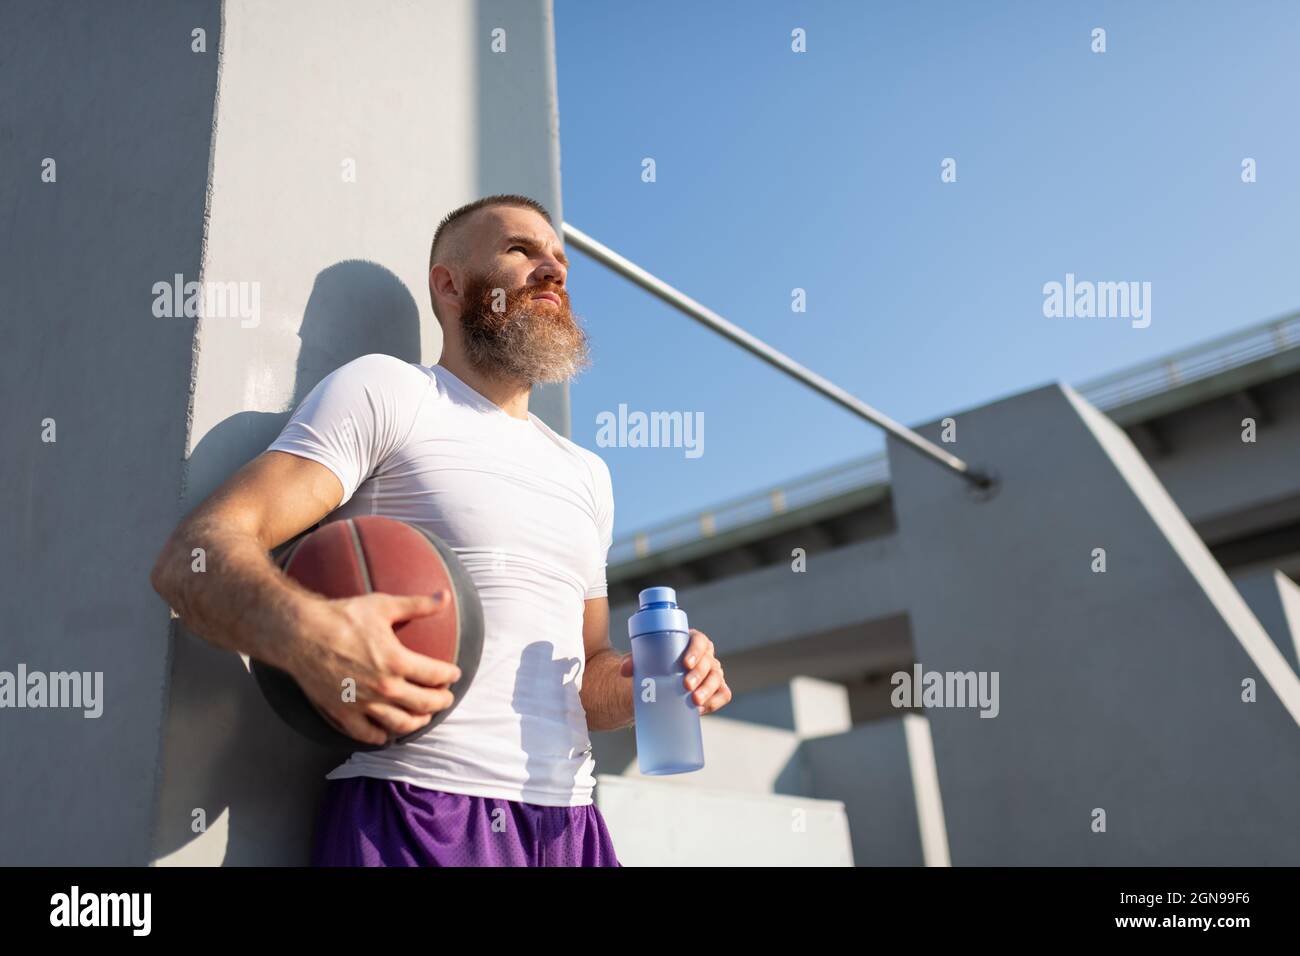 Determined bearded athlete with basketball ball and bottle of water looking away while taking break Stock Photo